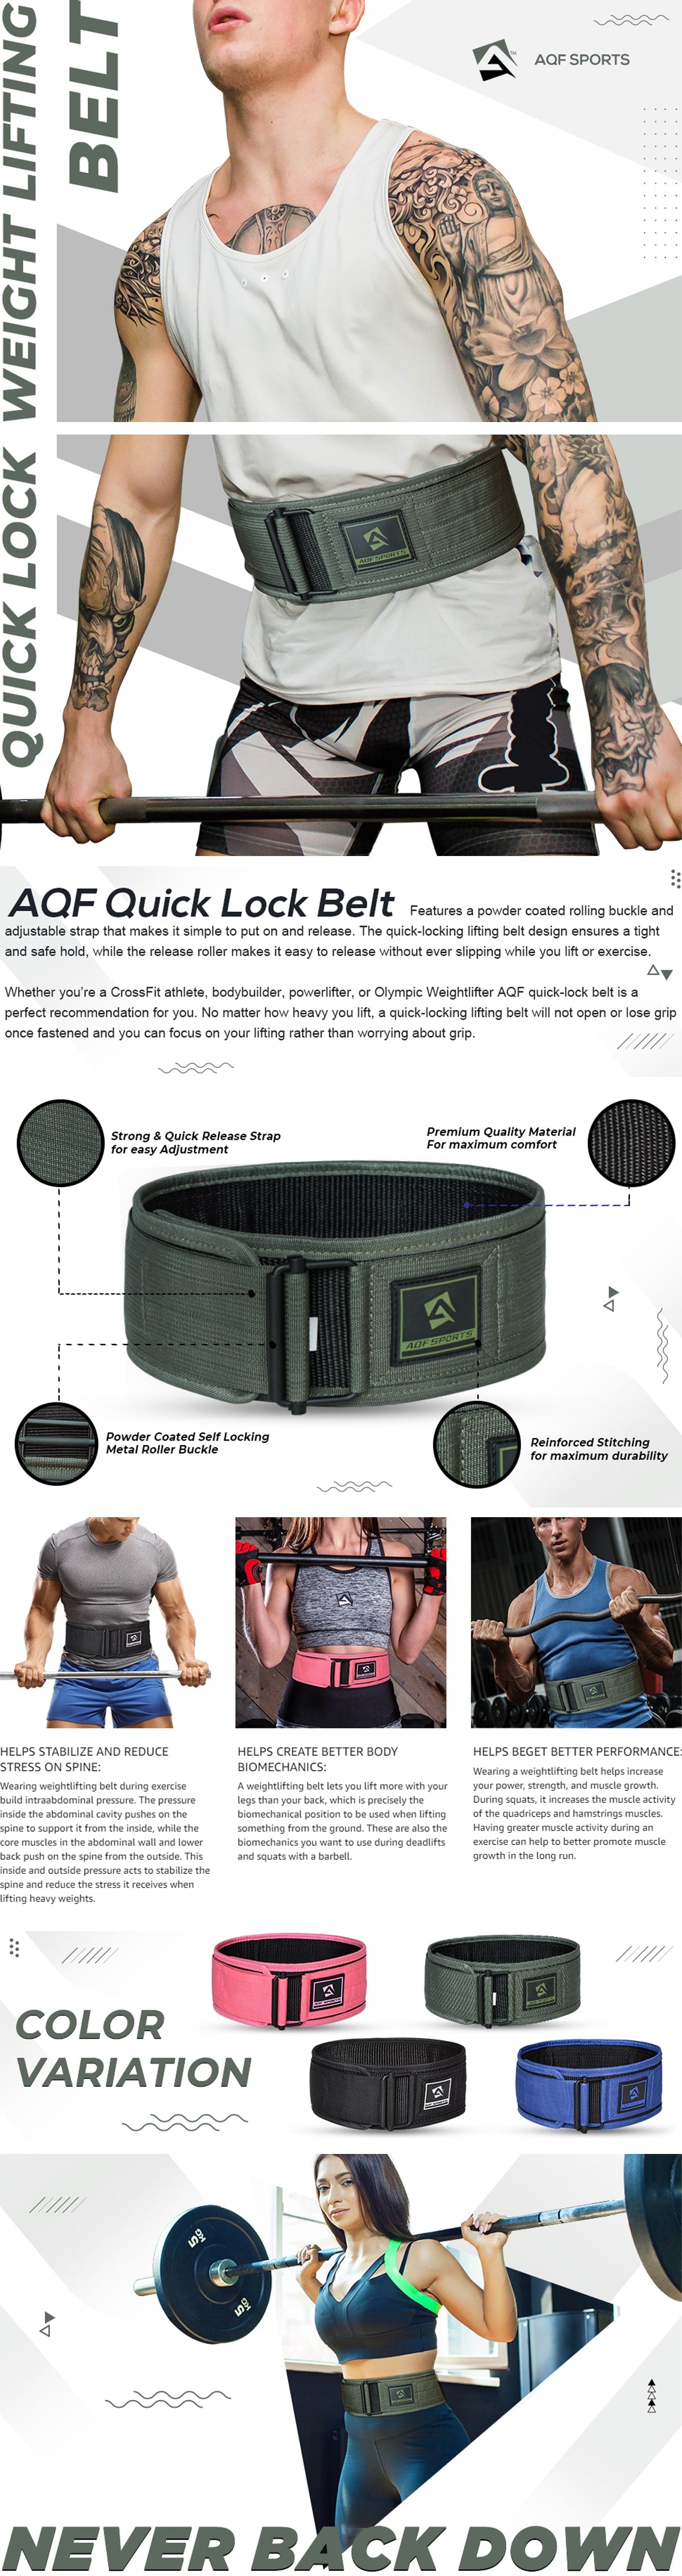 Infographics featuring product images, key features, color variations, and usage by athletes.